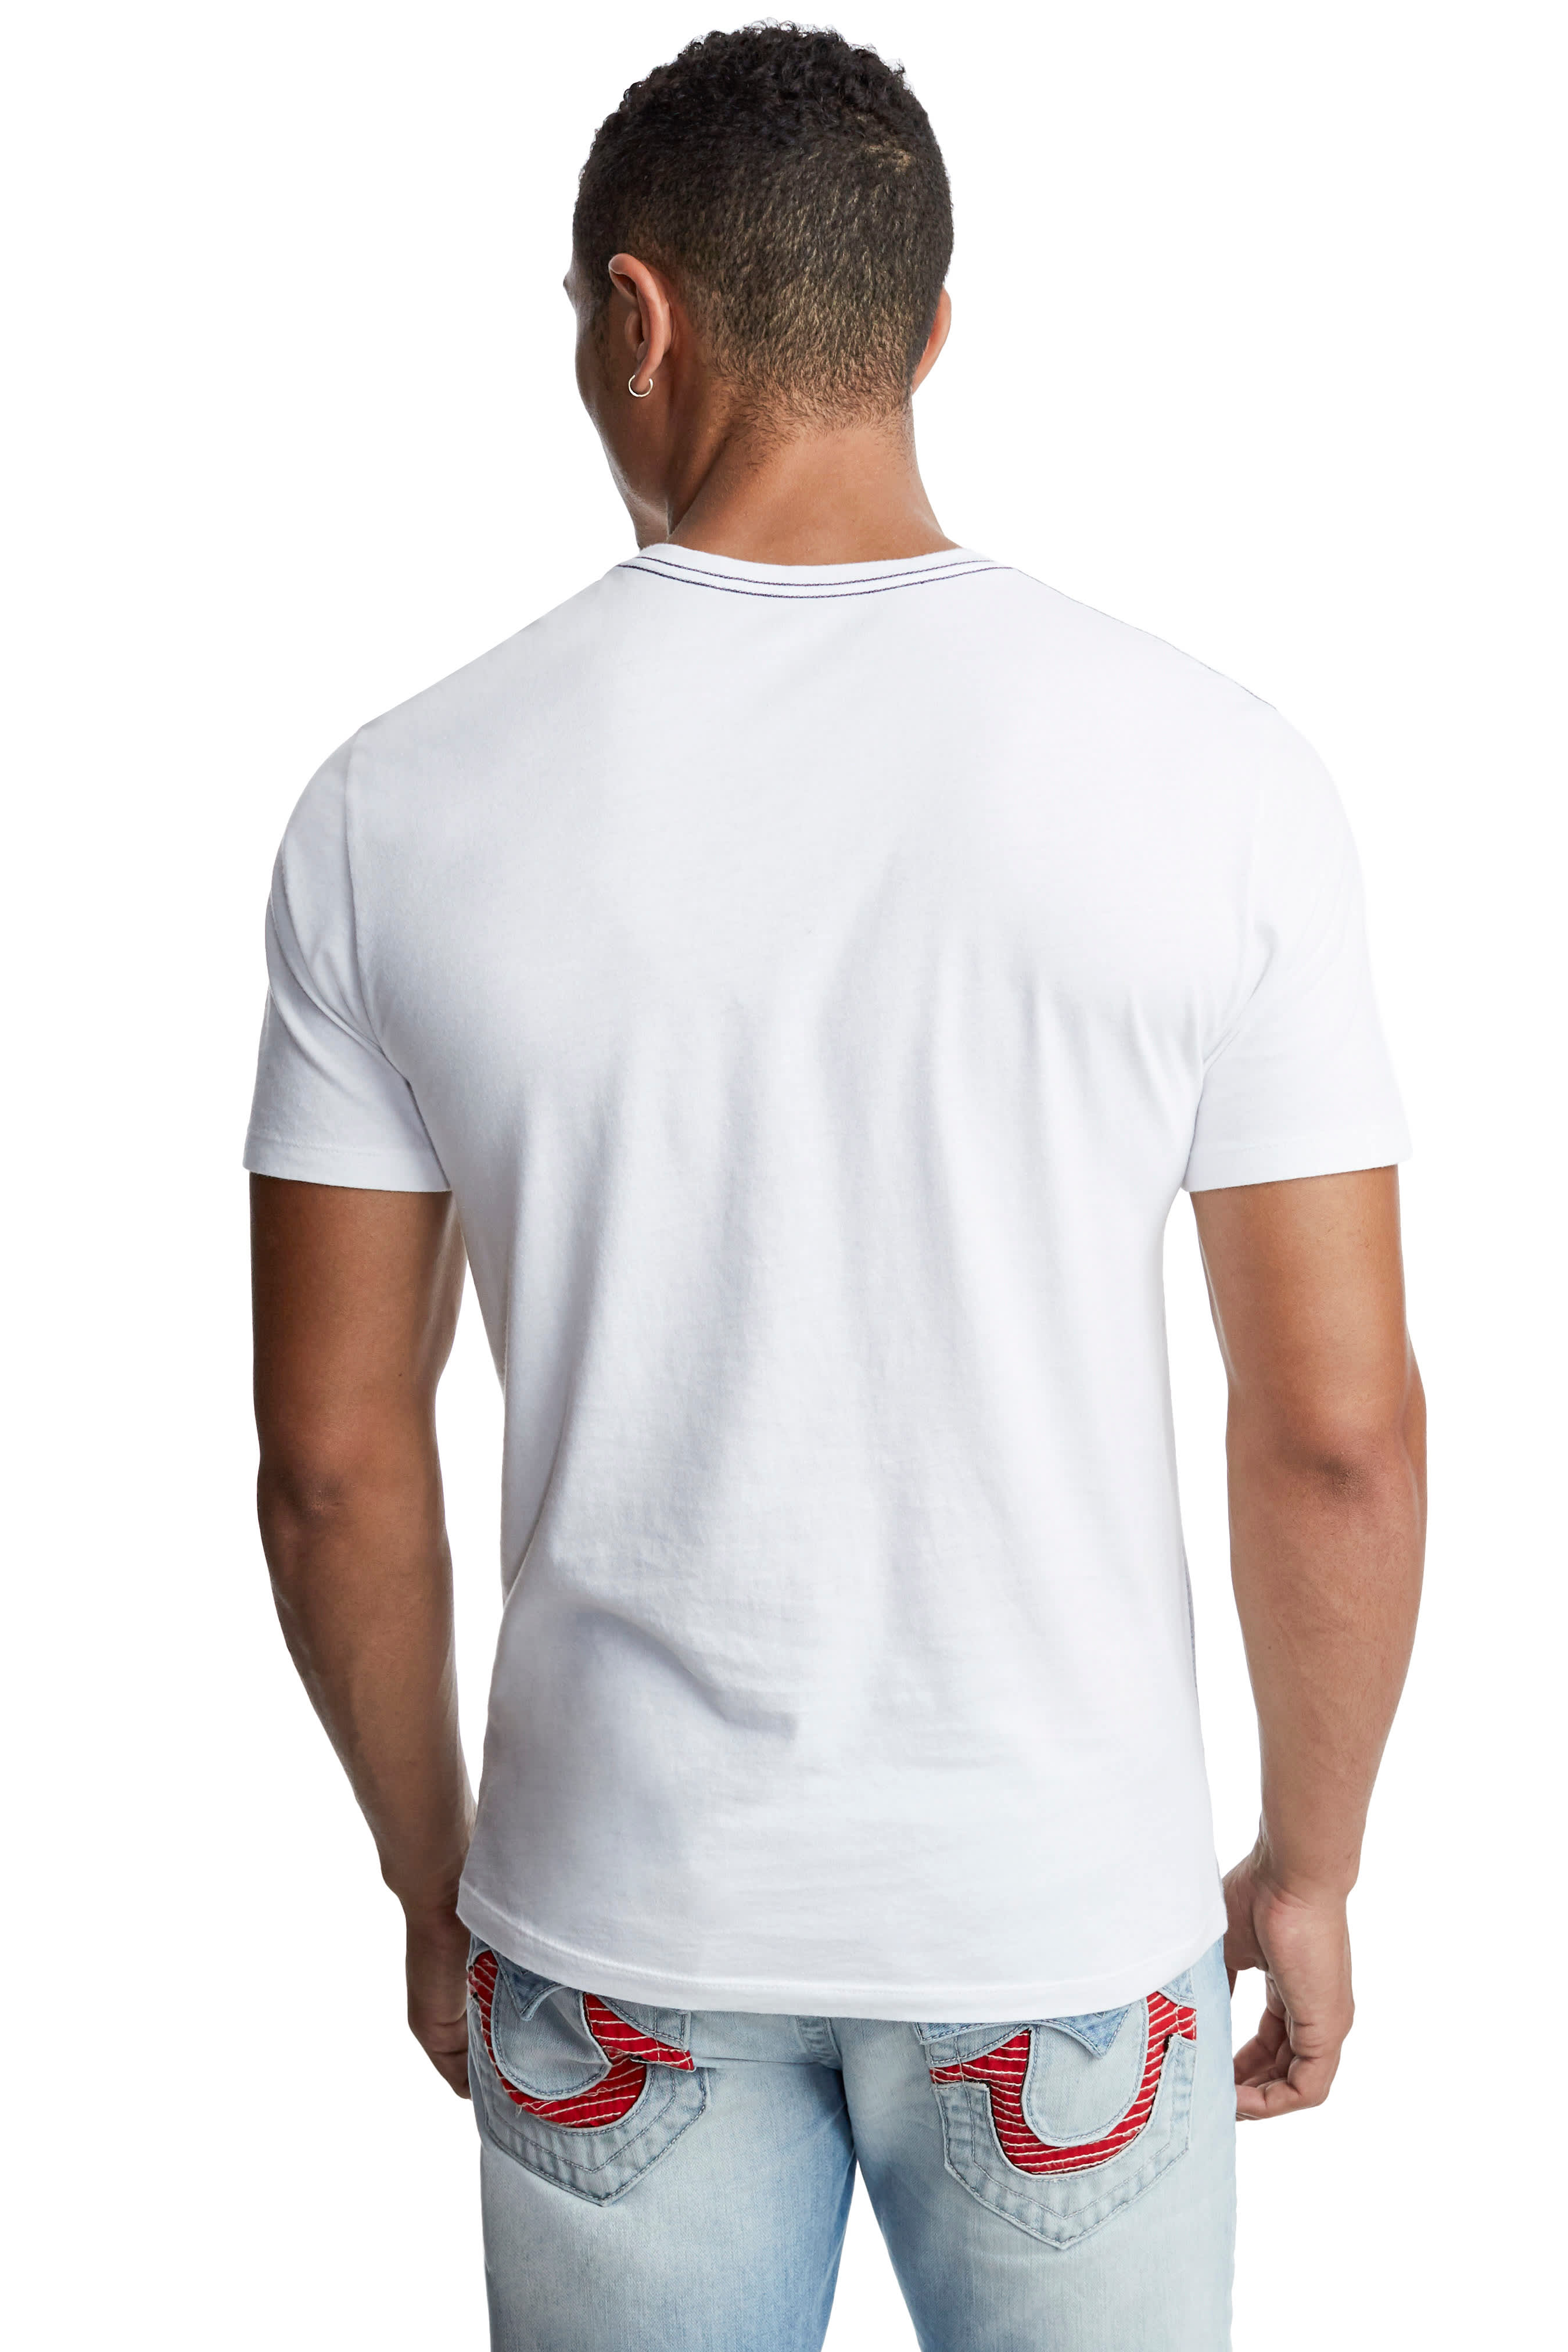 DOUBLE OMBRE V NECK MENS TEE